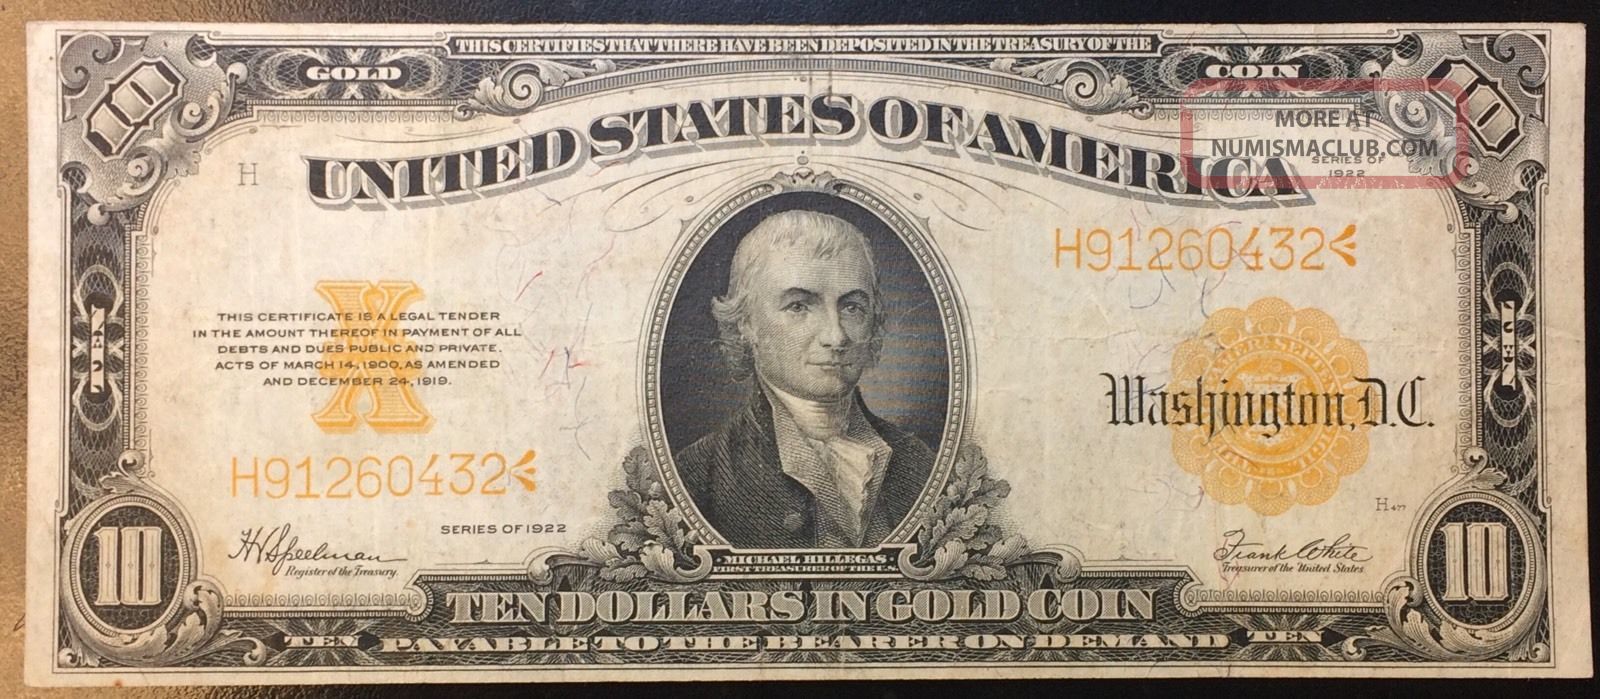 $10 Gold Seal Certificate Ten Dollar Bill 1922 White Speelman Note 2243 Large Size Notes photo